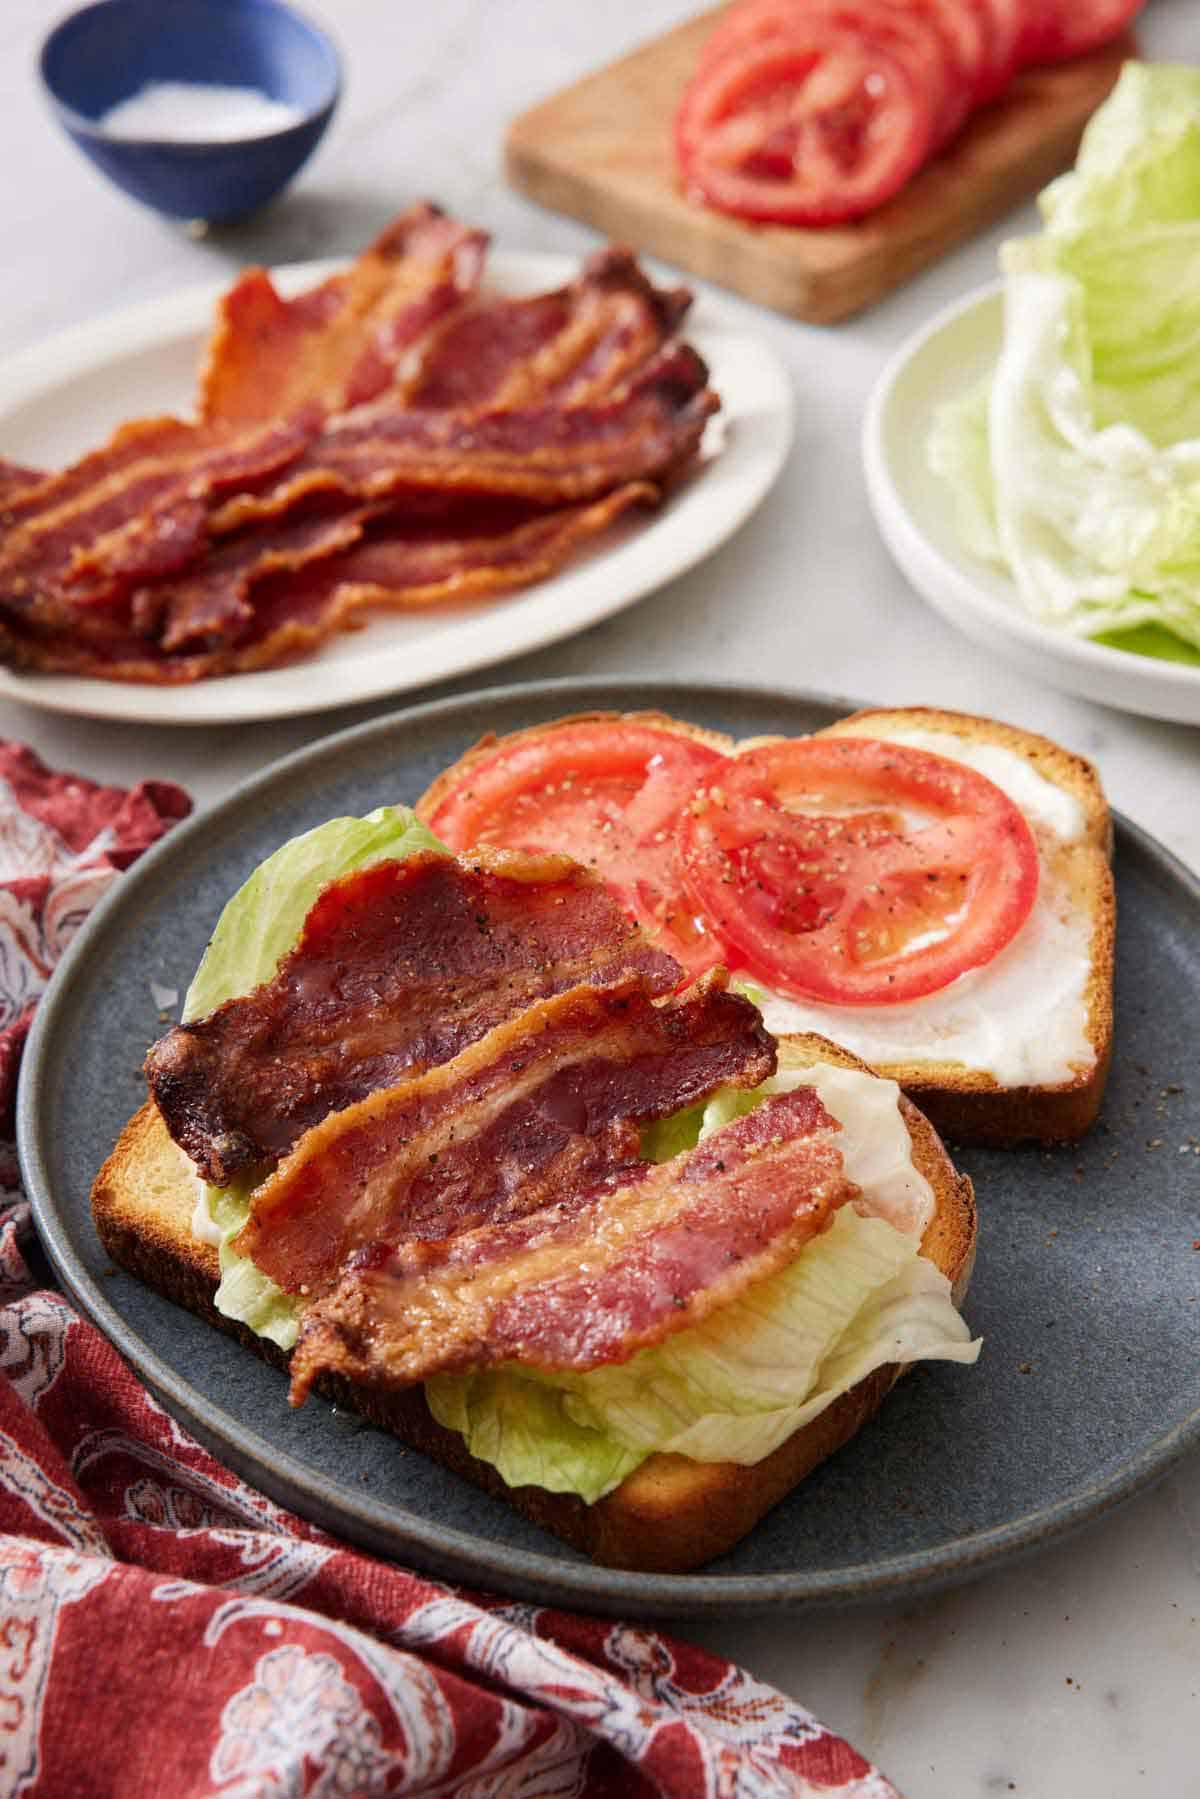 A plate with two slices of bread with mayo, sliced tomatoes, lettuce, and candied bacon. More candied bacon in the background along with lettuce and tomatoes.